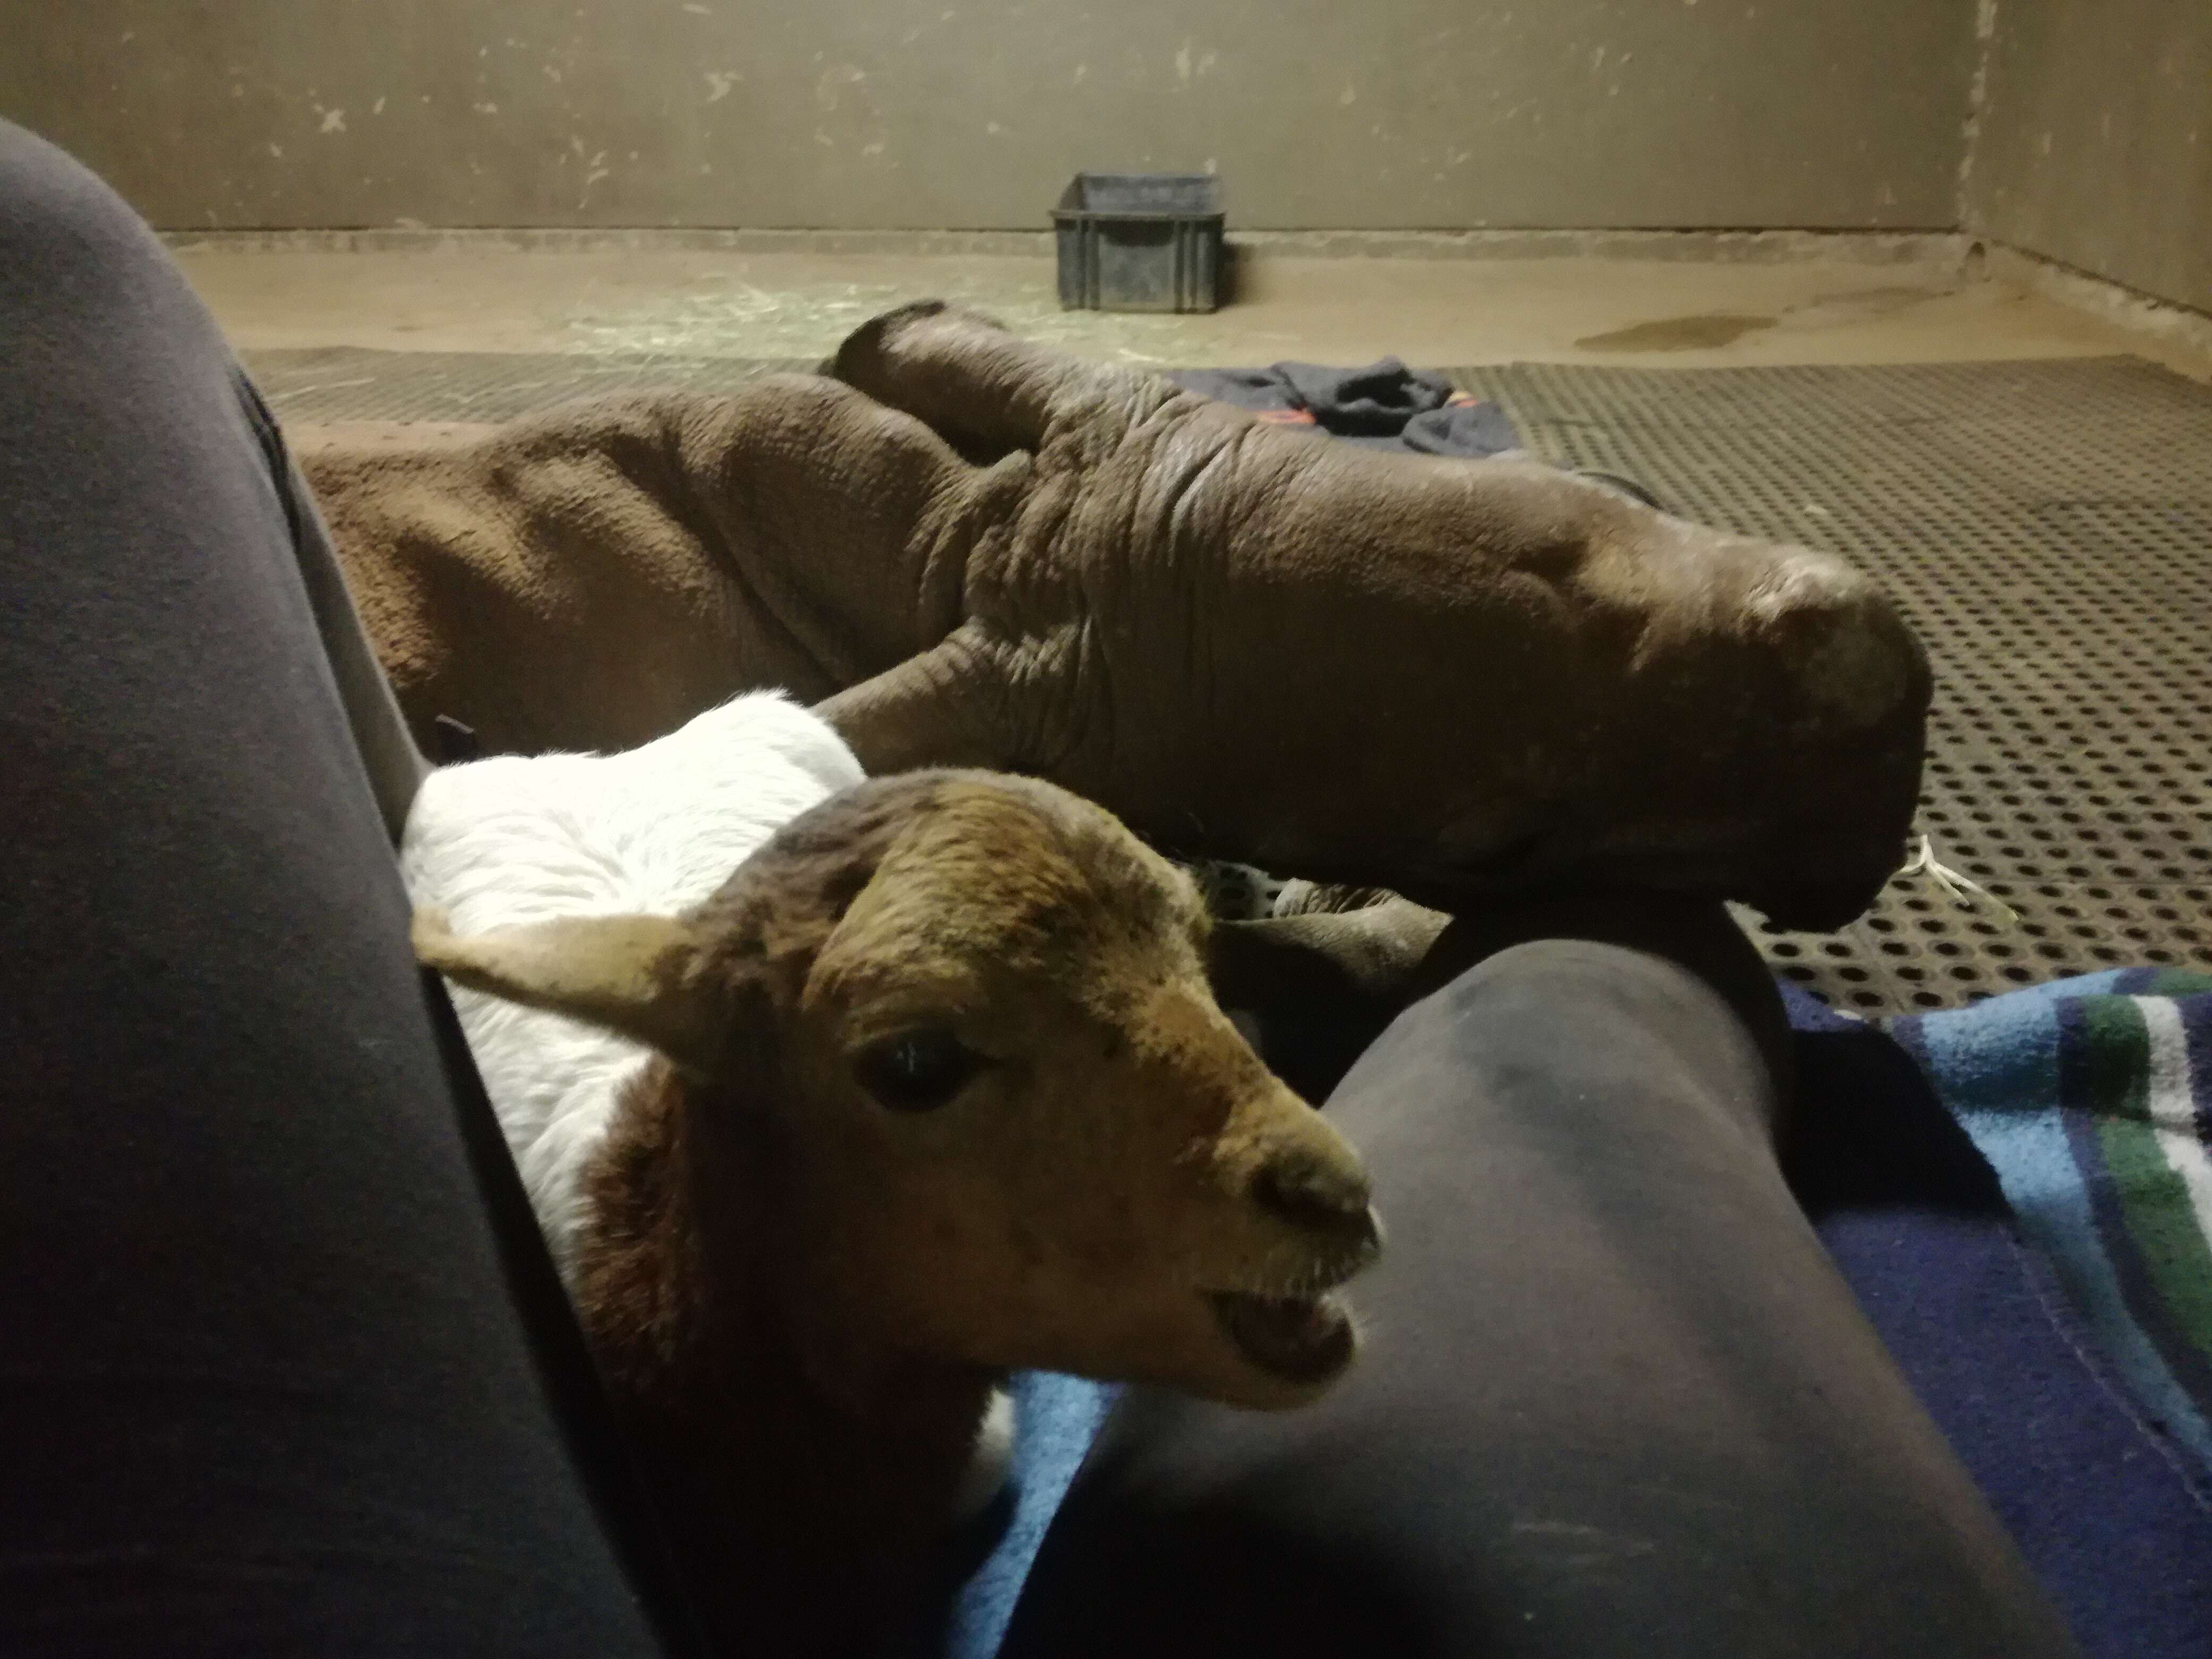 Orphaned rhino with his lamb friend at South Africa sanctuary